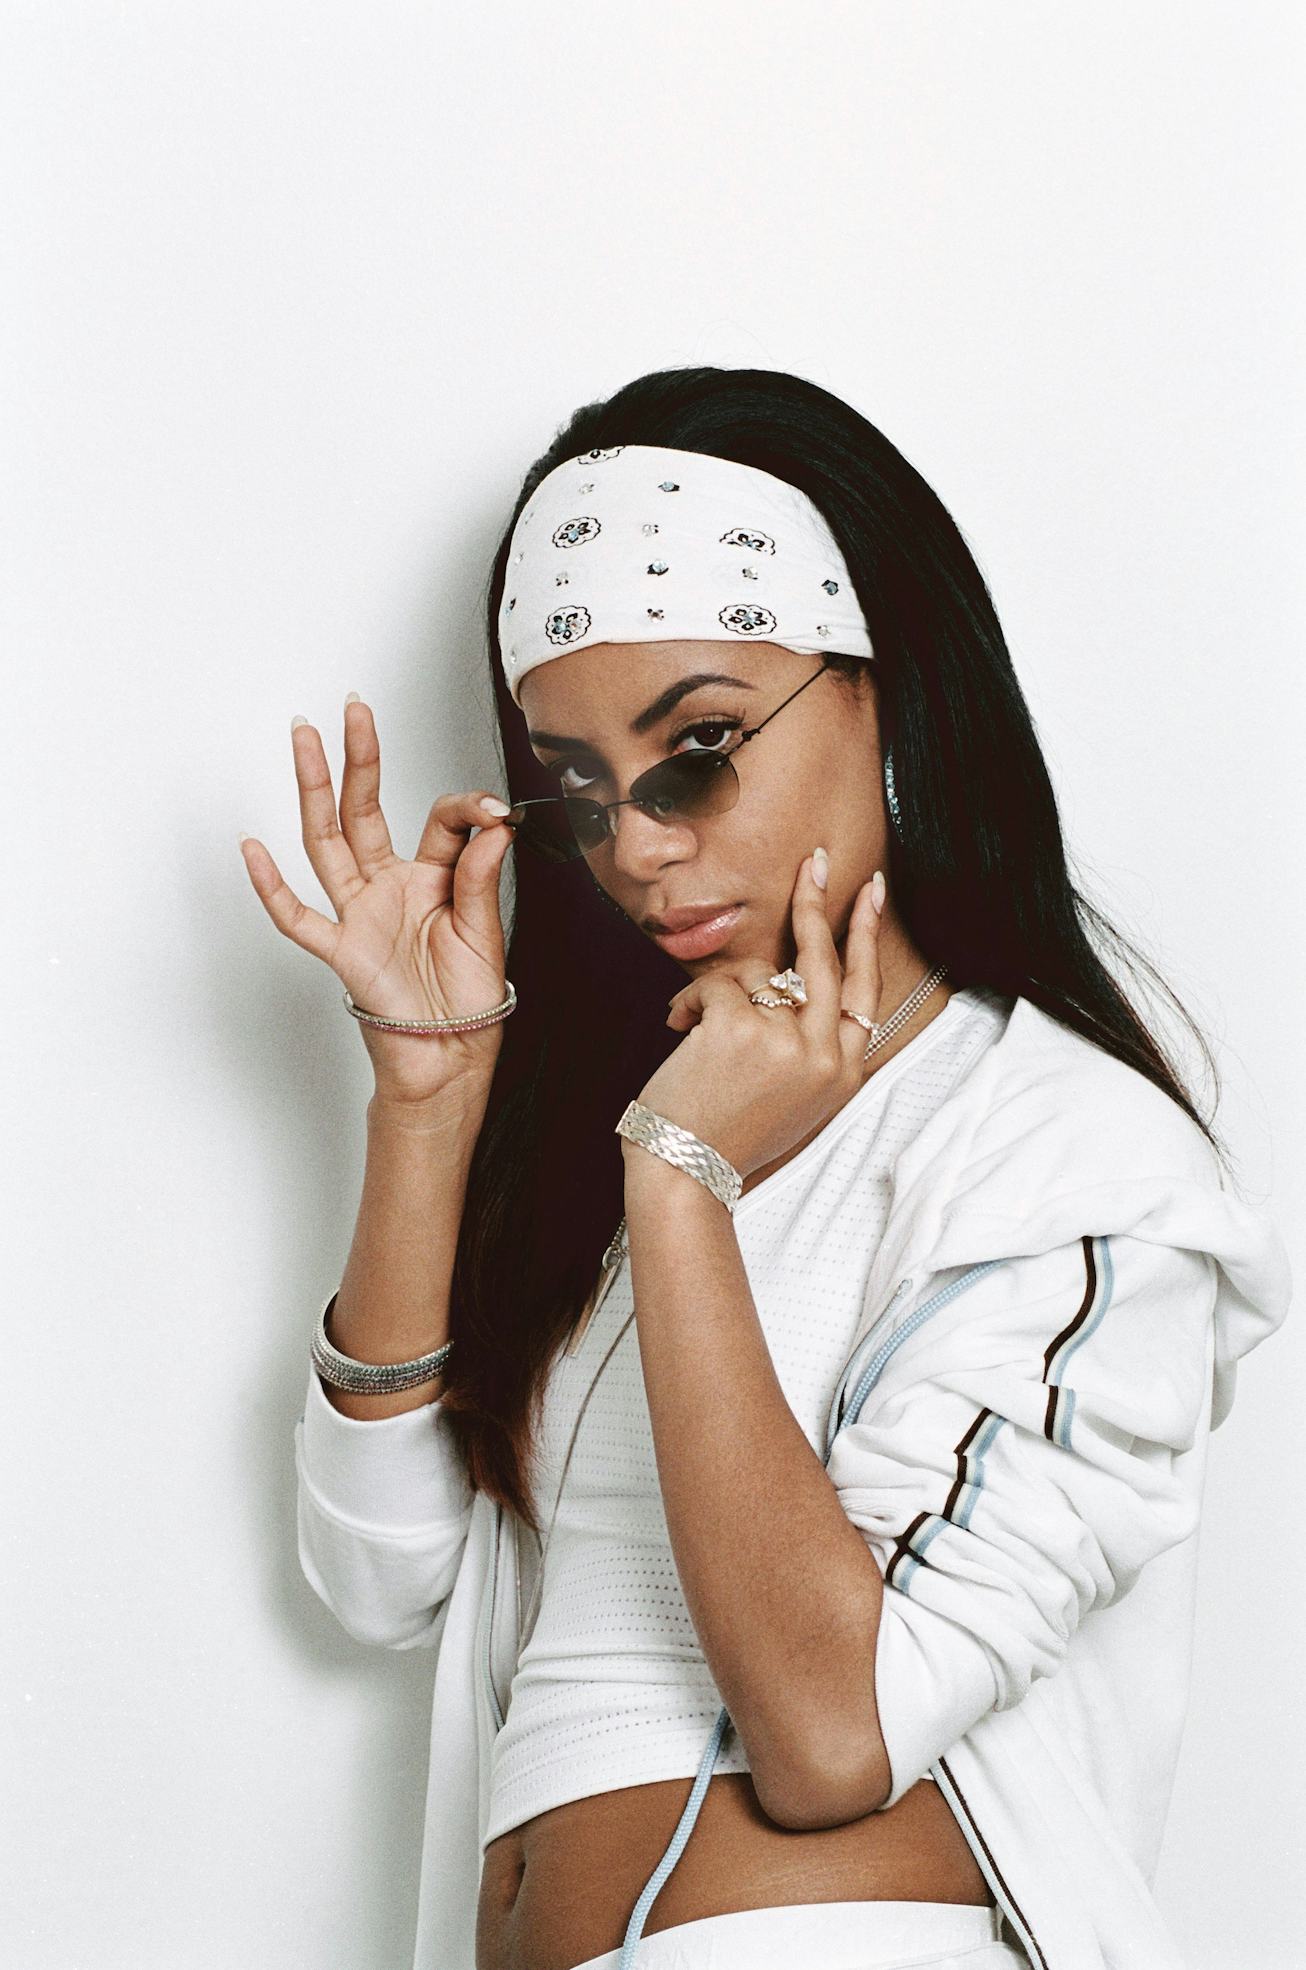 Could the Aaliyah discography finally be coming to streaming?